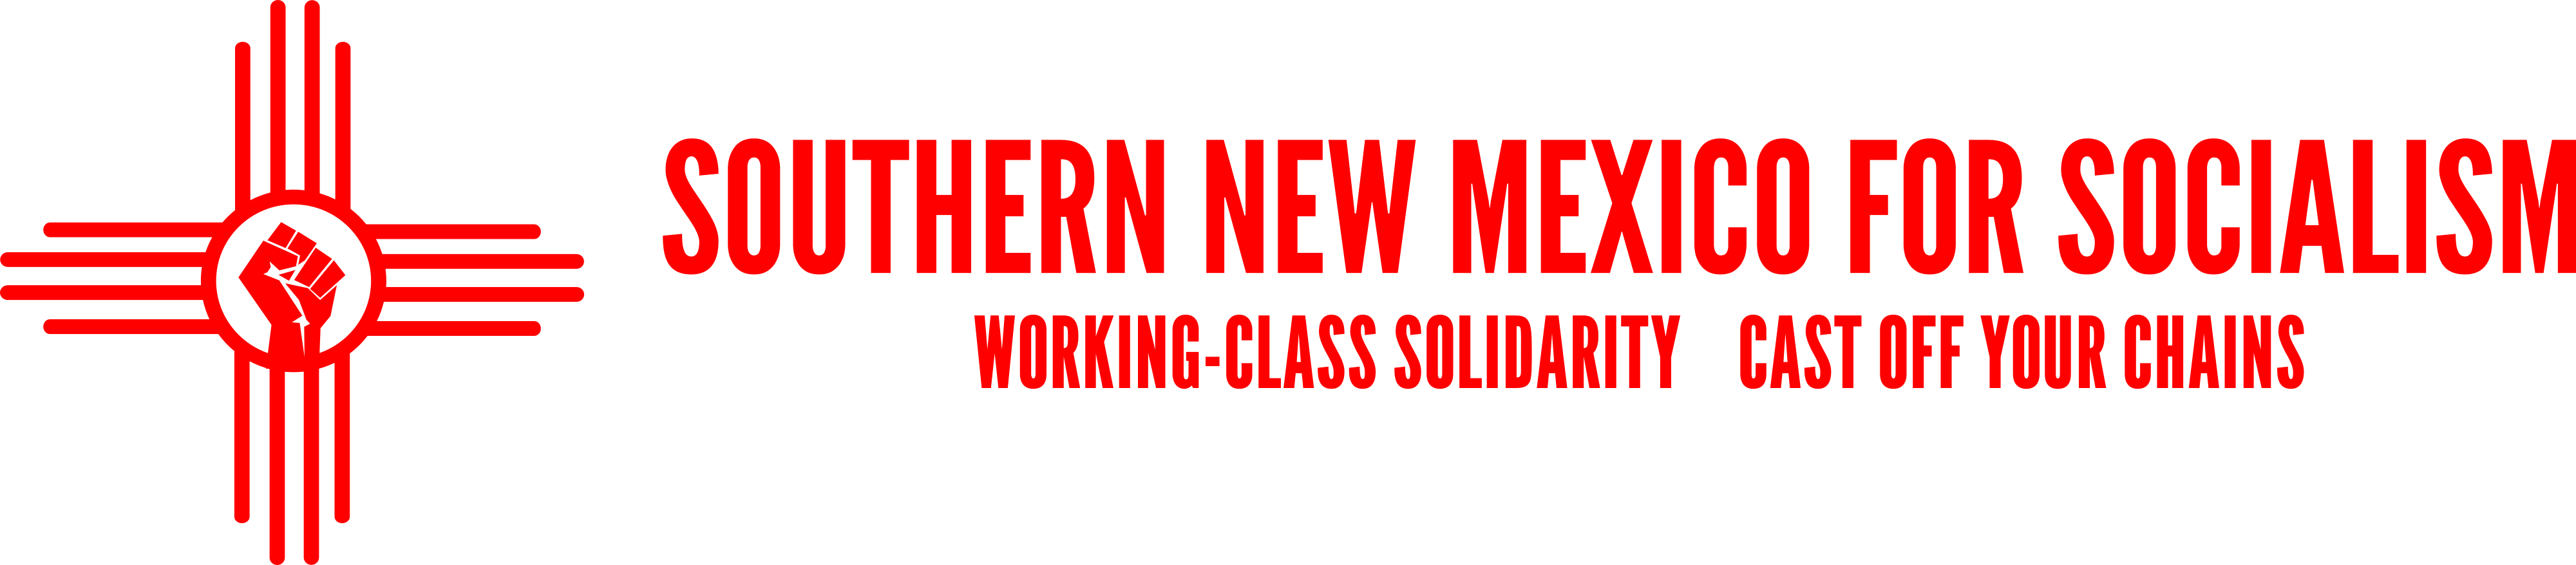 Southern New Mexico for Socialism